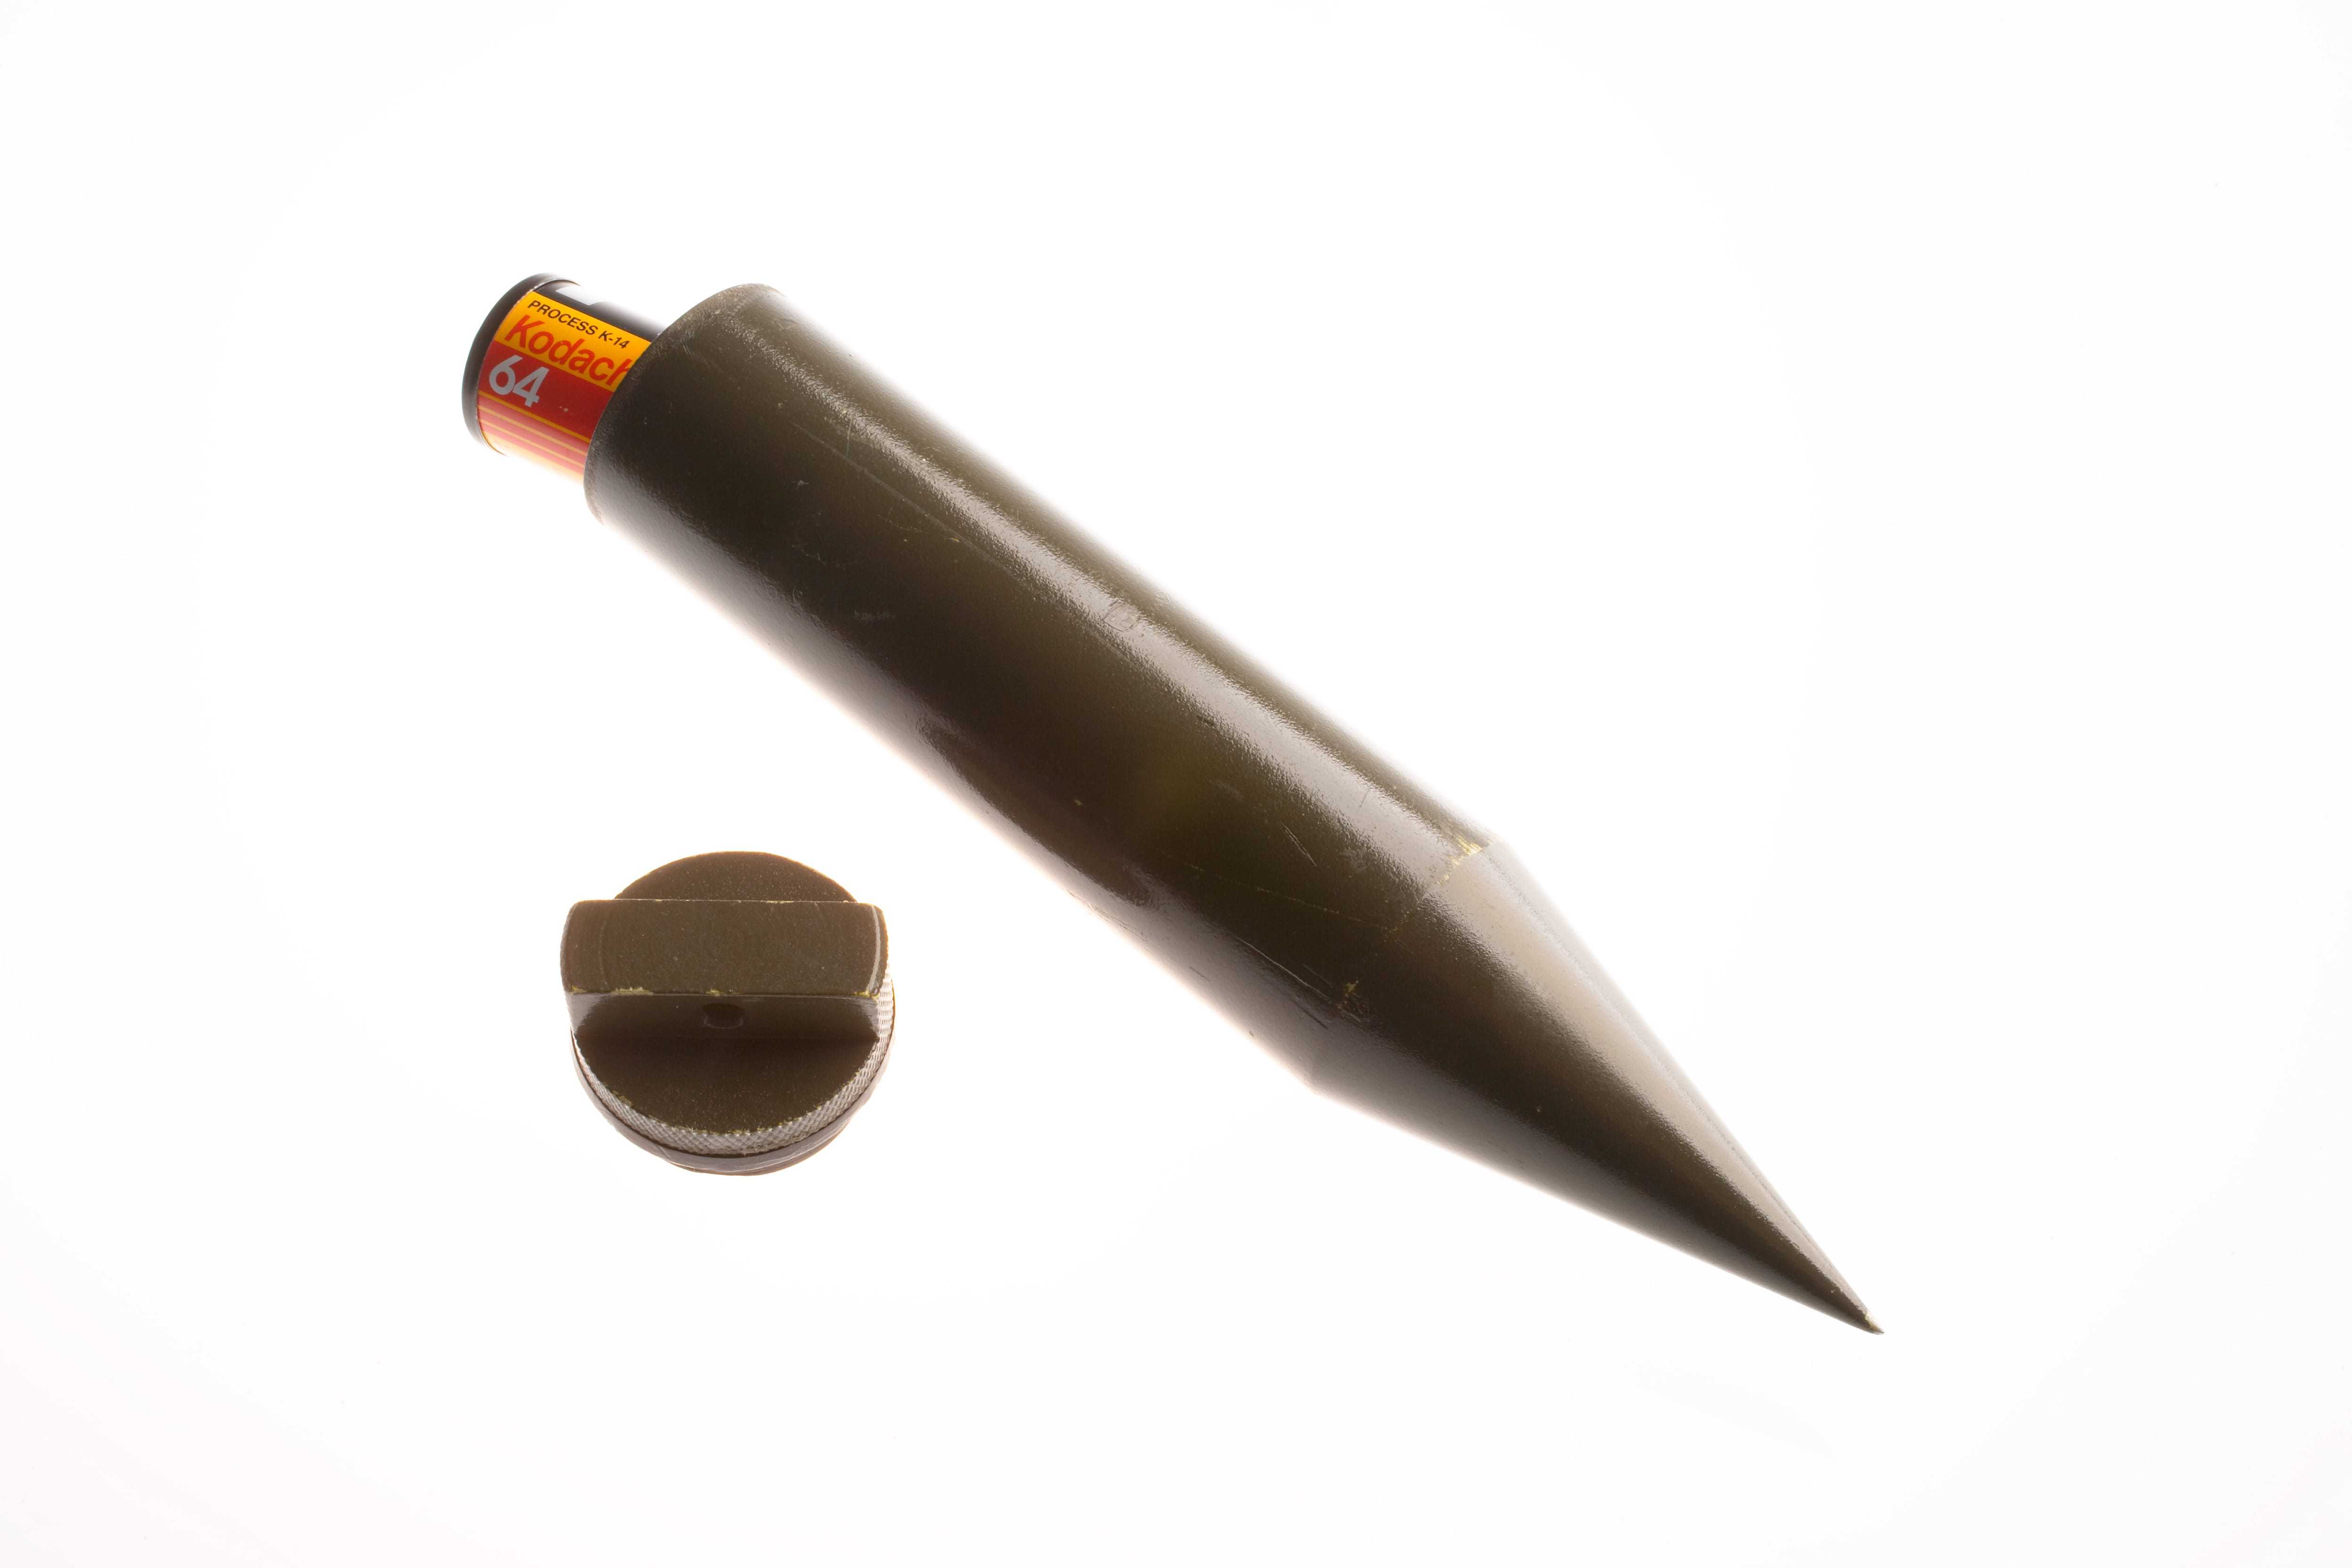 A small brown hollow spike that can contain messages, documents, or film